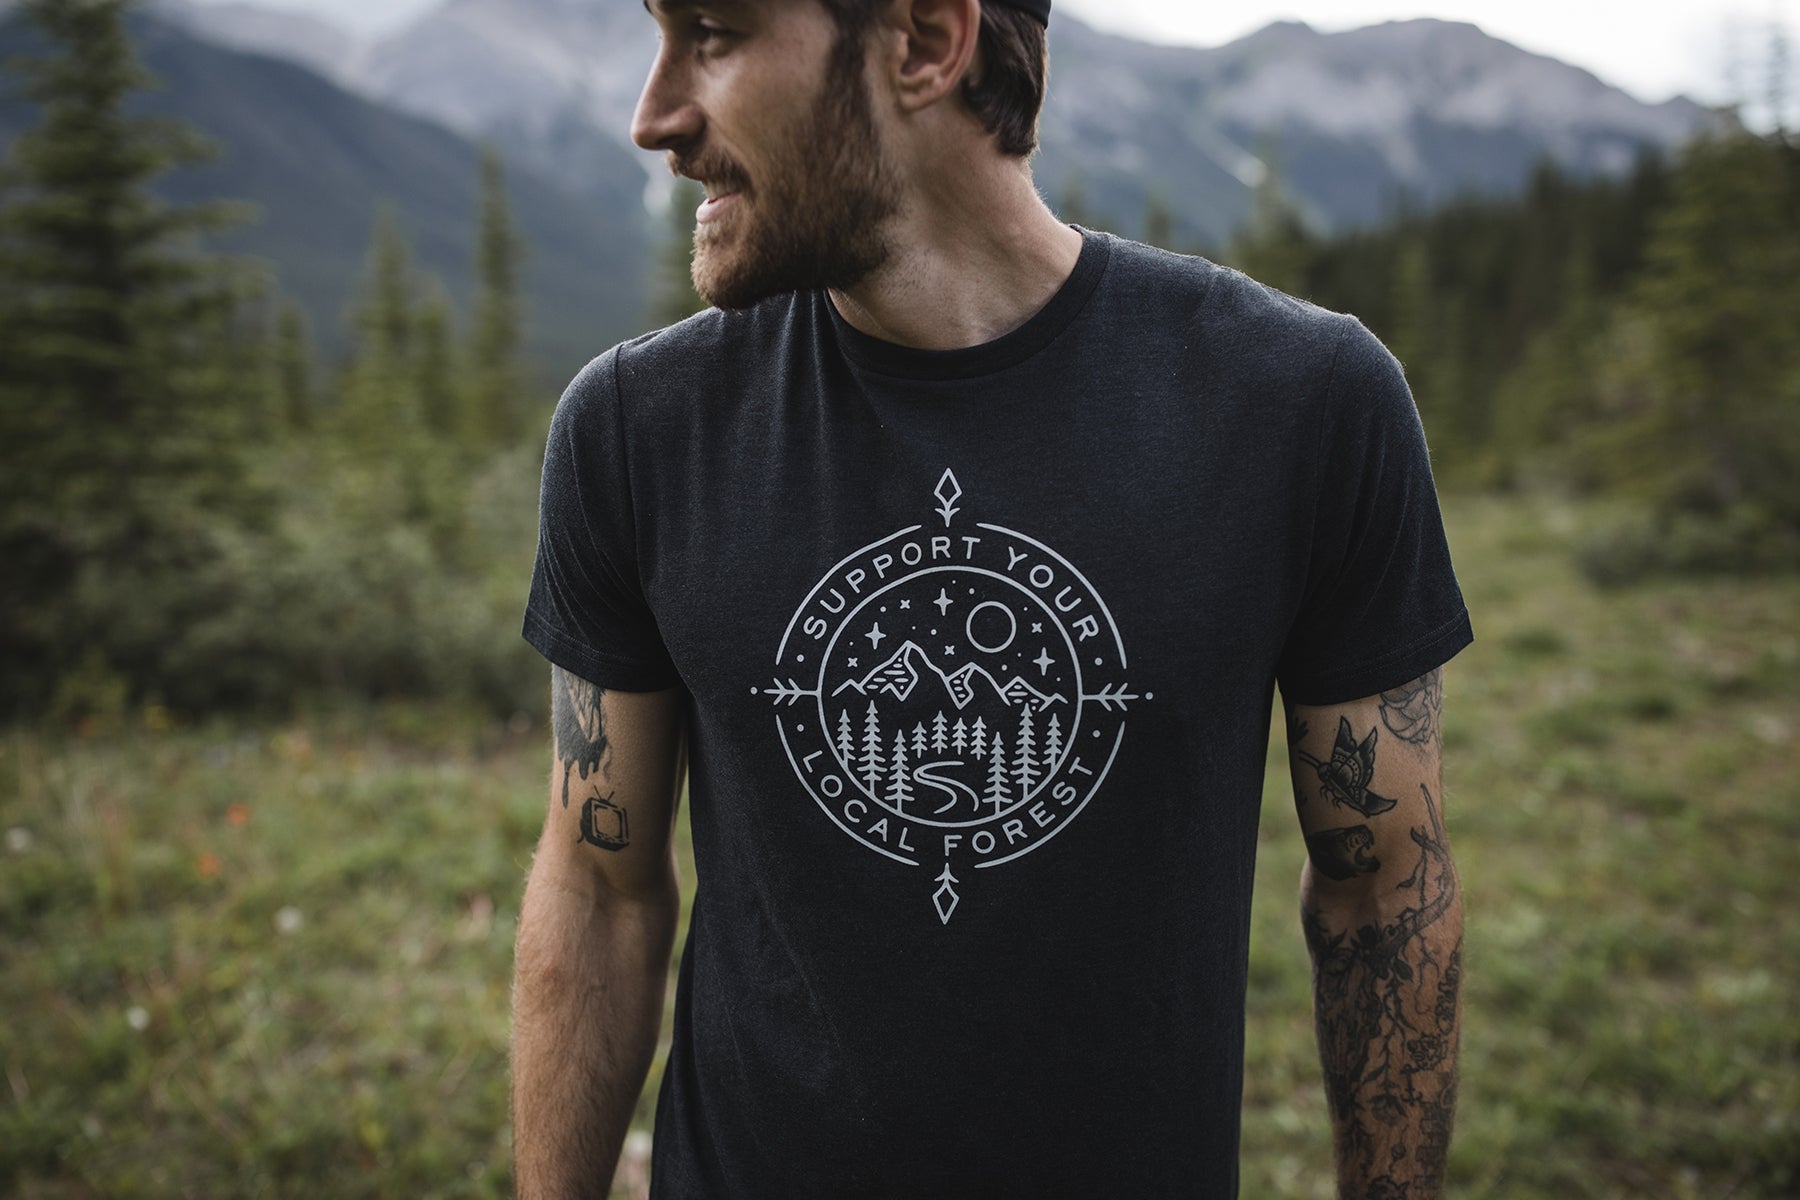 A t-shirt from Tentree promoting the protection of local forests. 